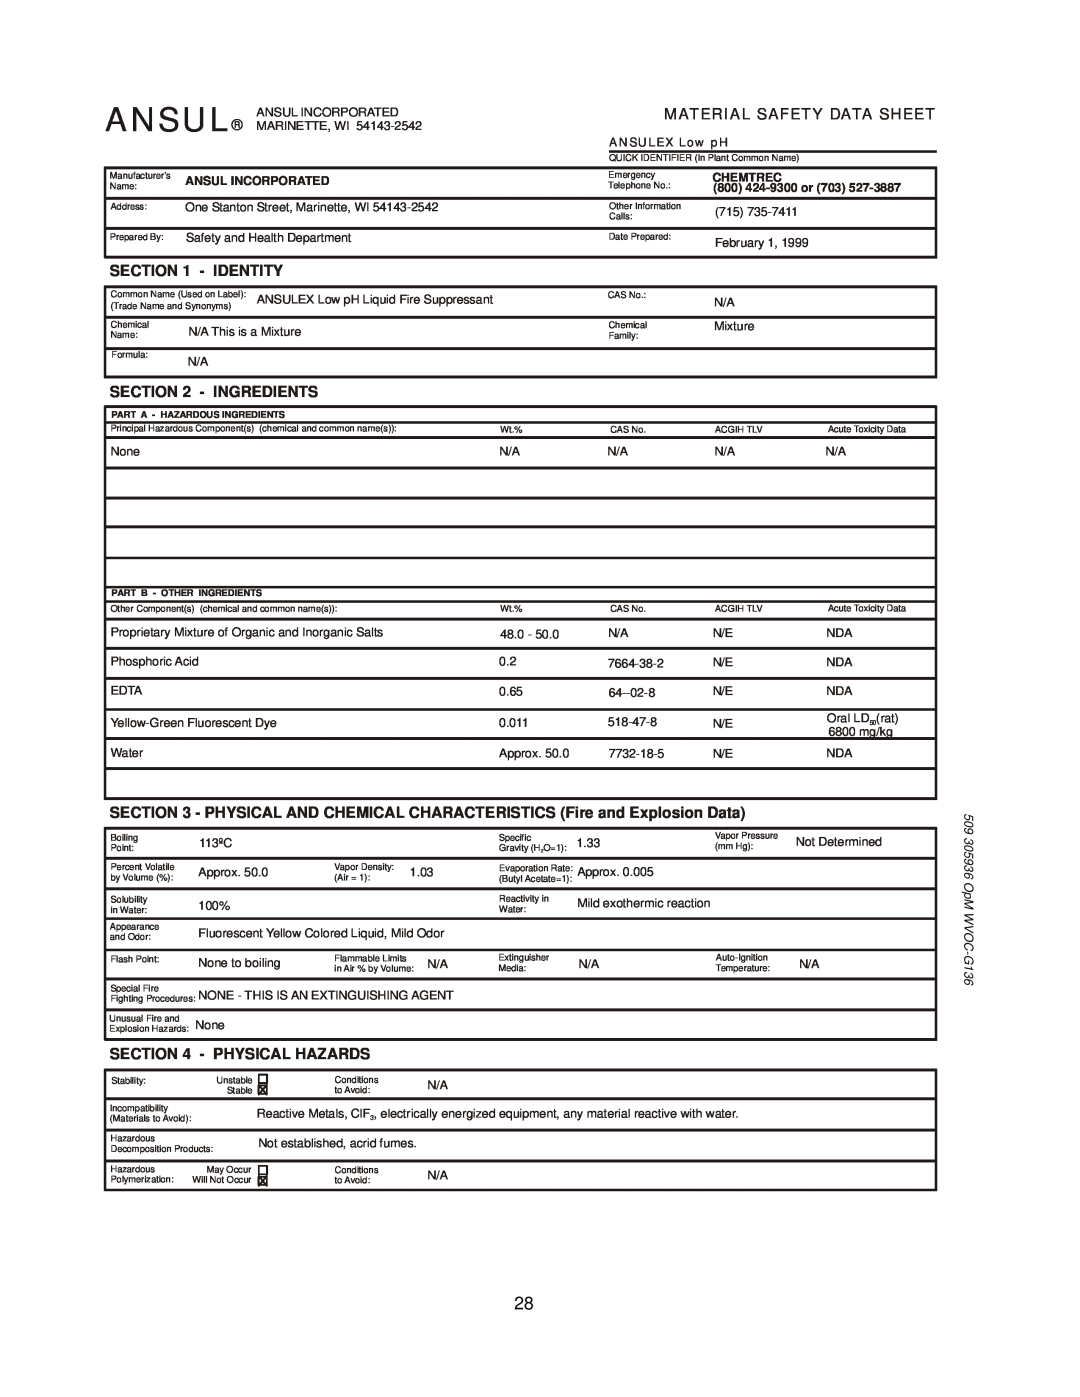 Wells WVOC-G136 Ansul, Identity, Ingredients, Physical Hazards, Material Safety Data Sheet, ANSULEX Low pH, Chemtrec 